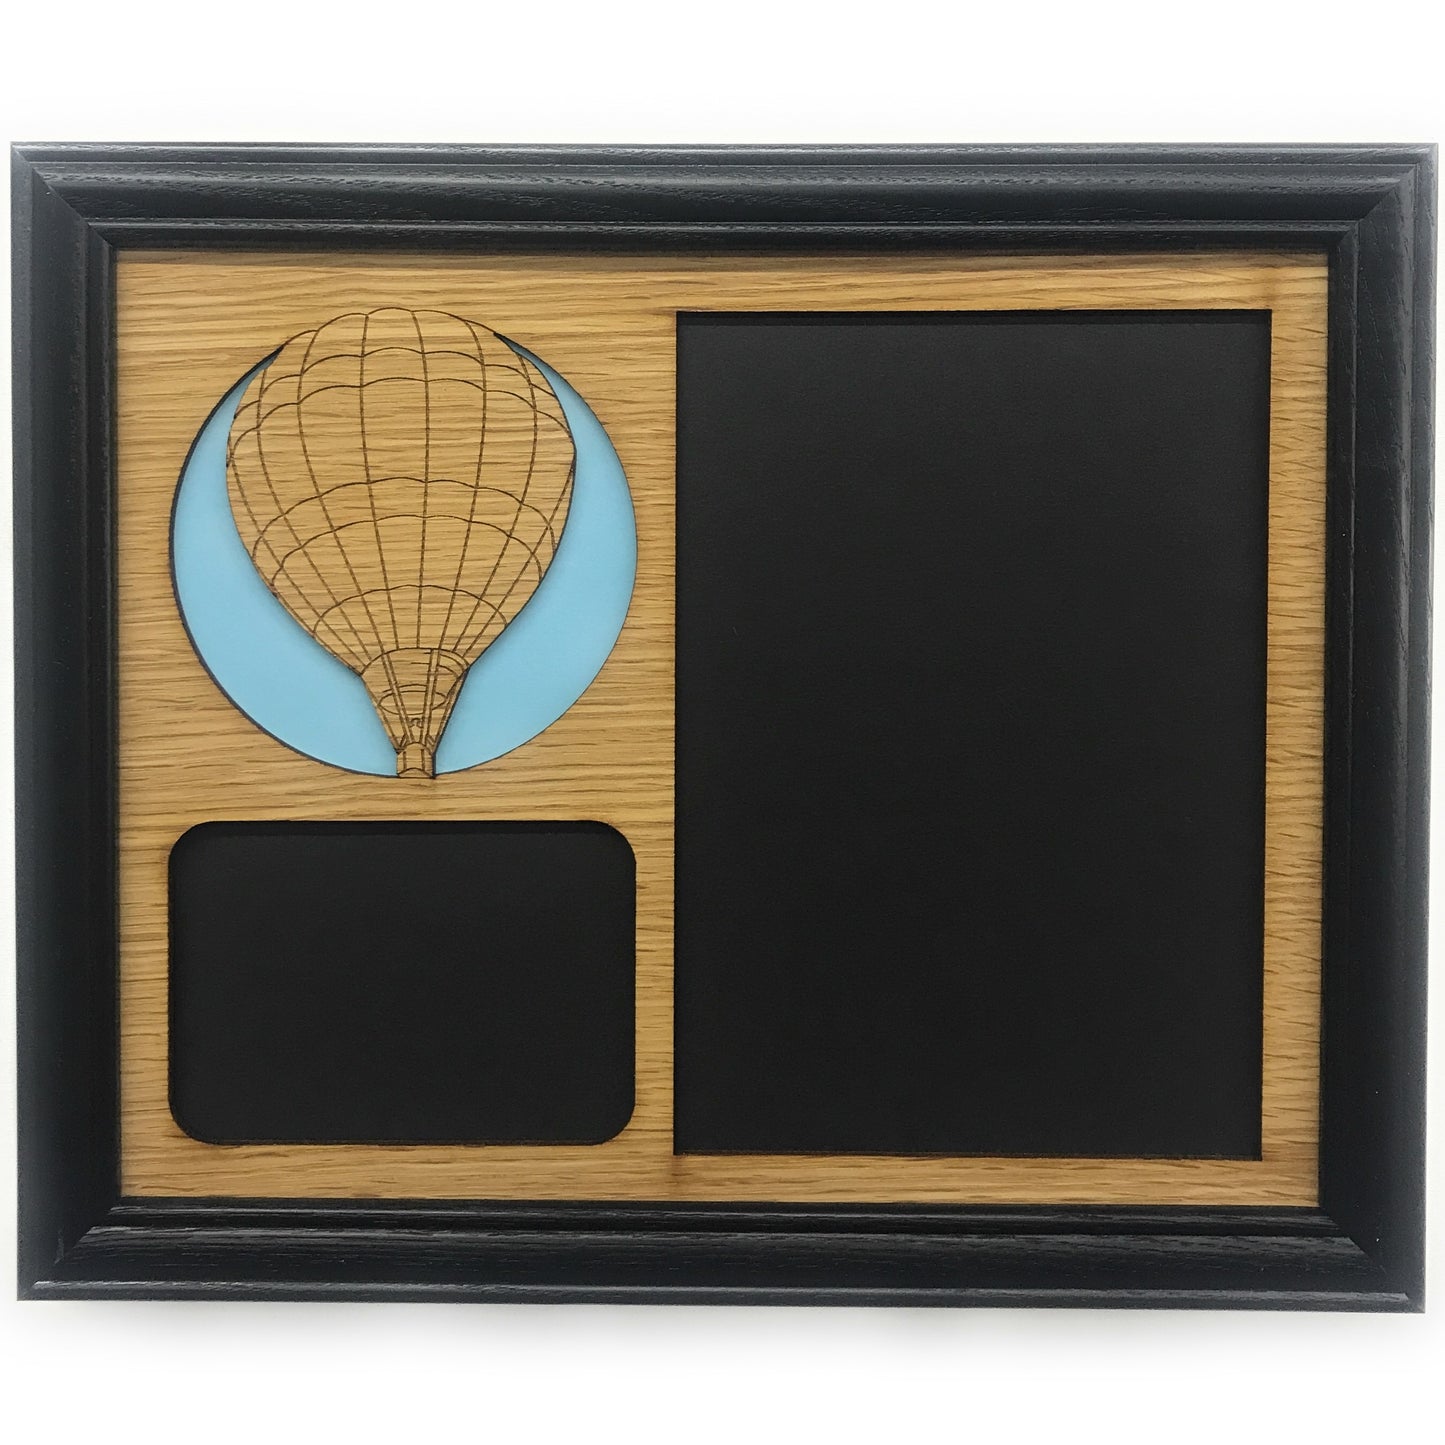 Hot Air Balloon Picture Frame - 8x10 Frame Hold 5x7 and 3x4 Photos